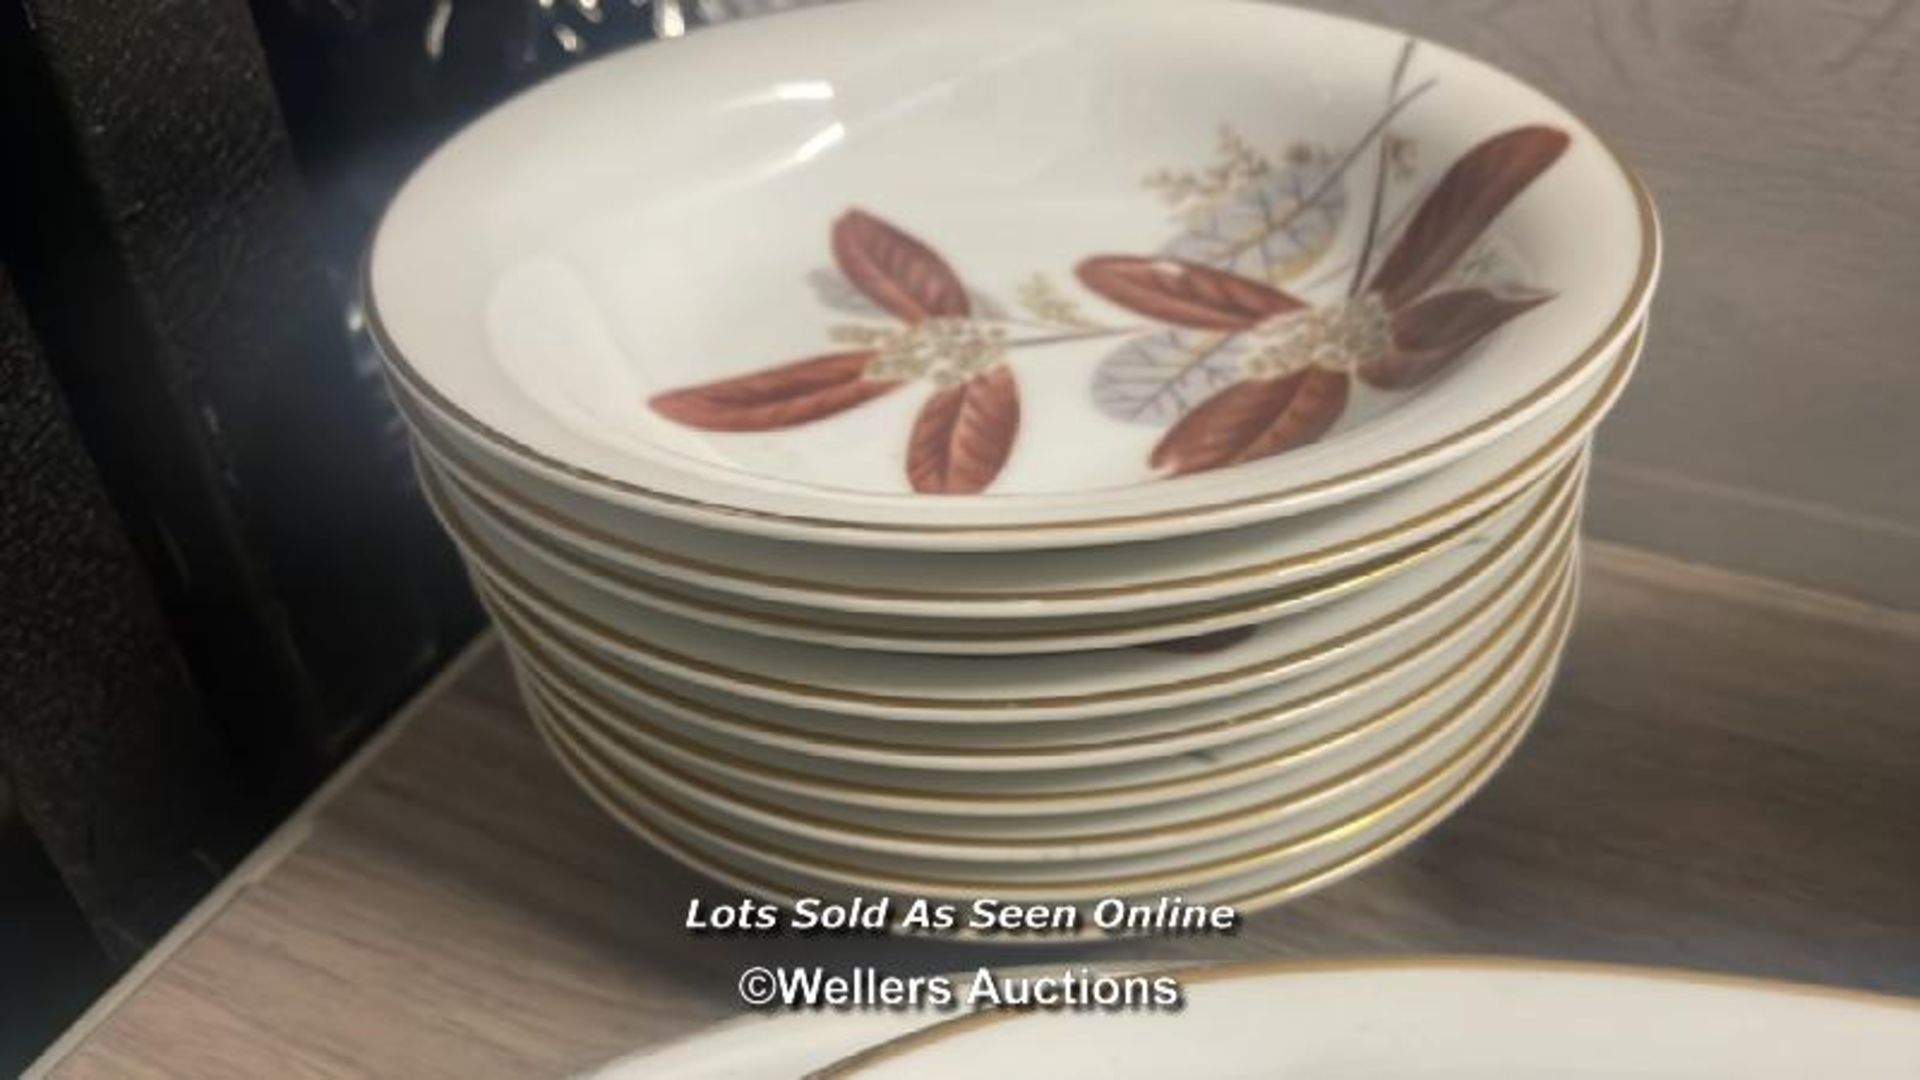 A PART NORITAKE CHINA TABLE SERVICE INCLUDING PLATES, SERVING DISHES & CUPS (62) - Image 9 of 12